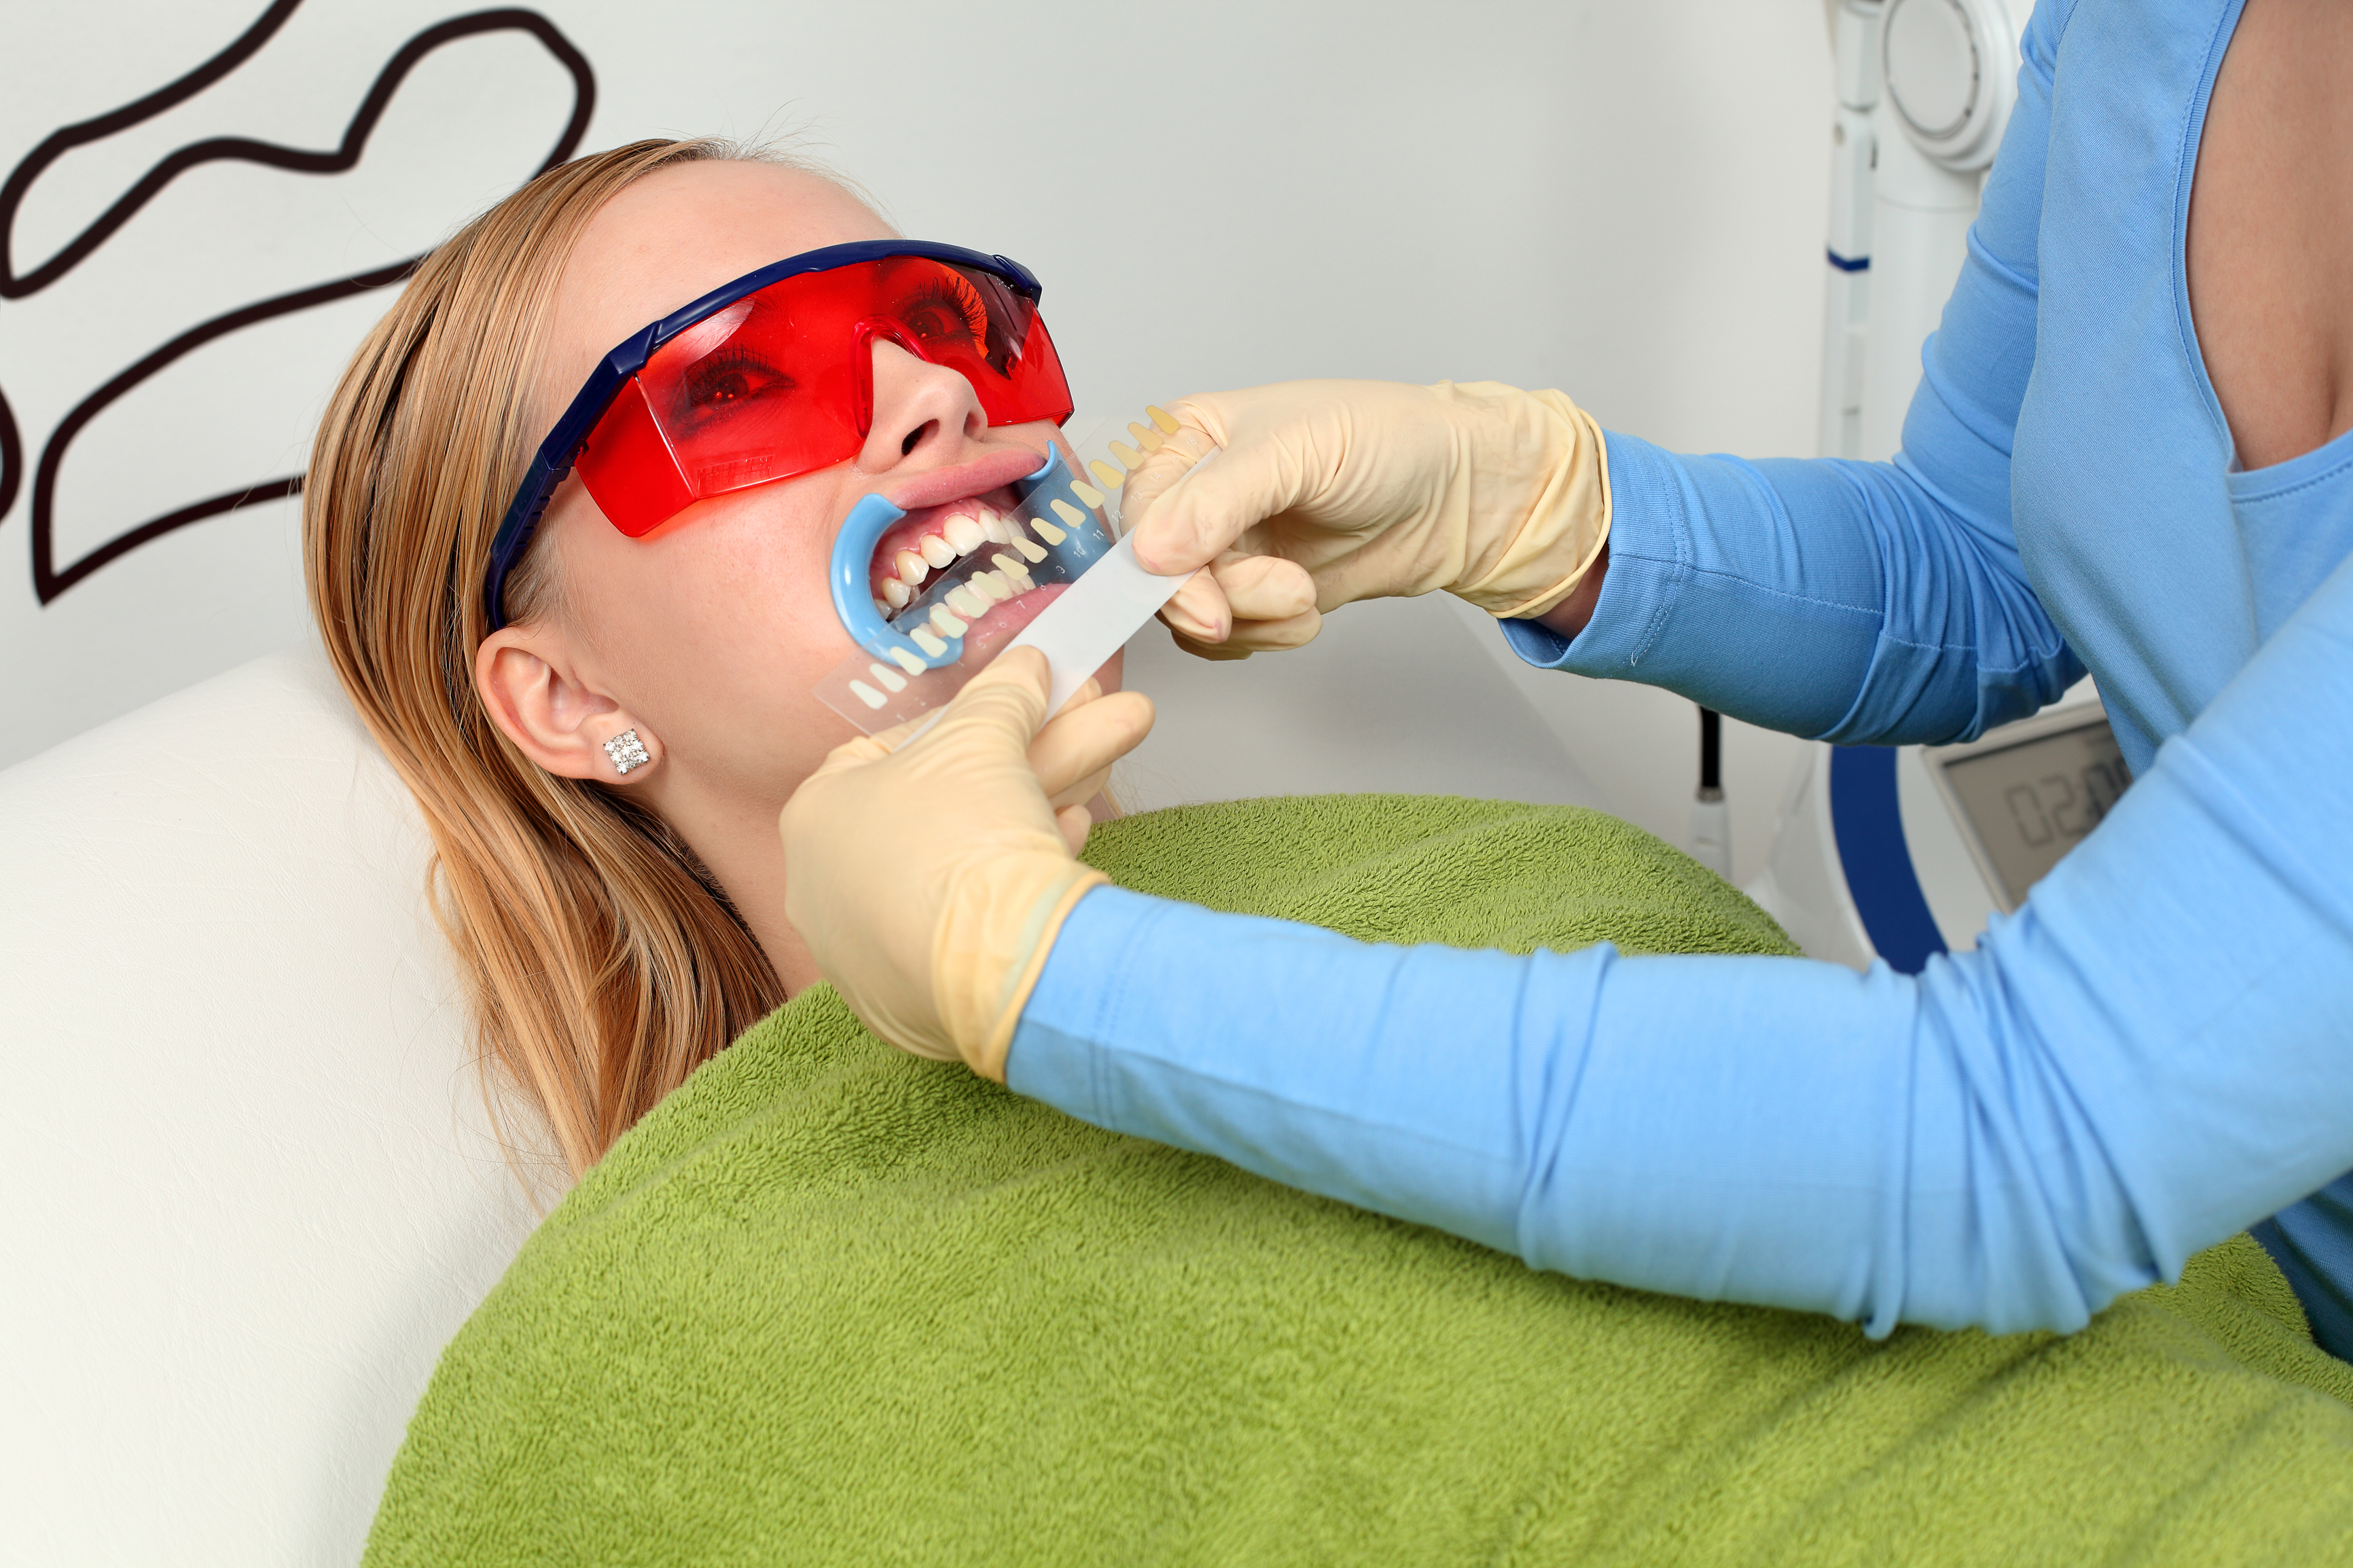 A patient and her dentist about to whiten her teeth